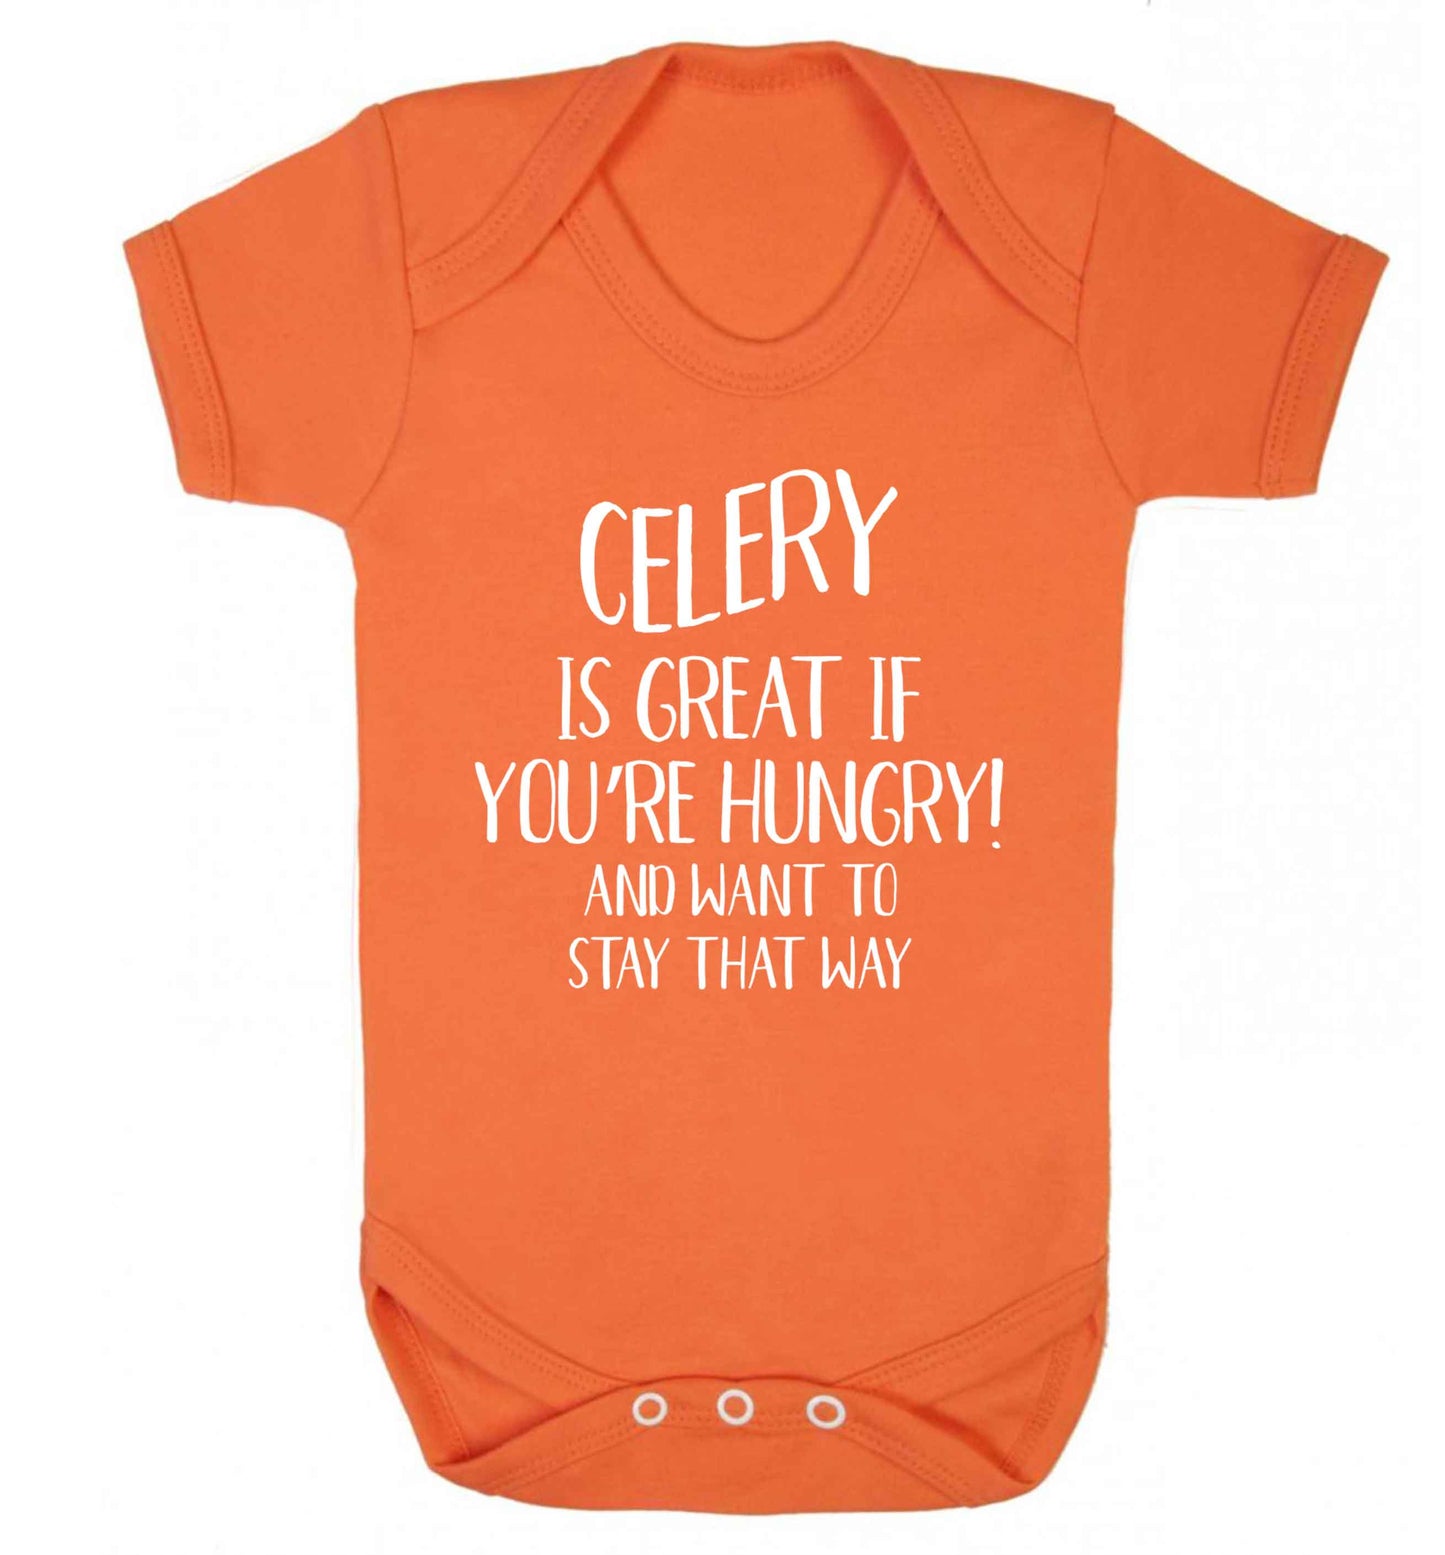 Cellery is great when you're hungry and want to stay that way Baby Vest orange 18-24 months